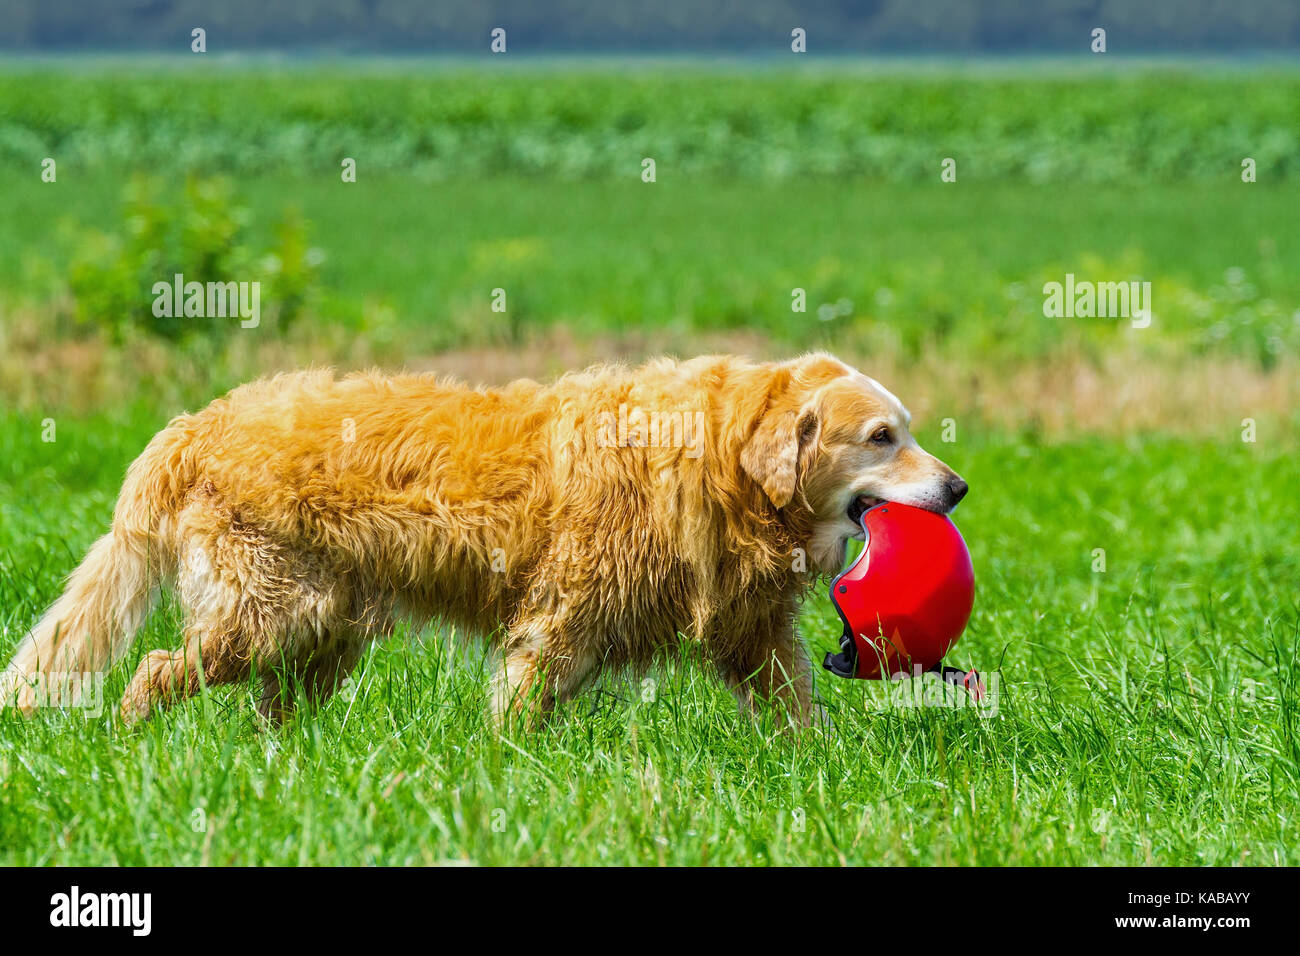 Dog walking in meadow faisant sports helmet Banque D'Images